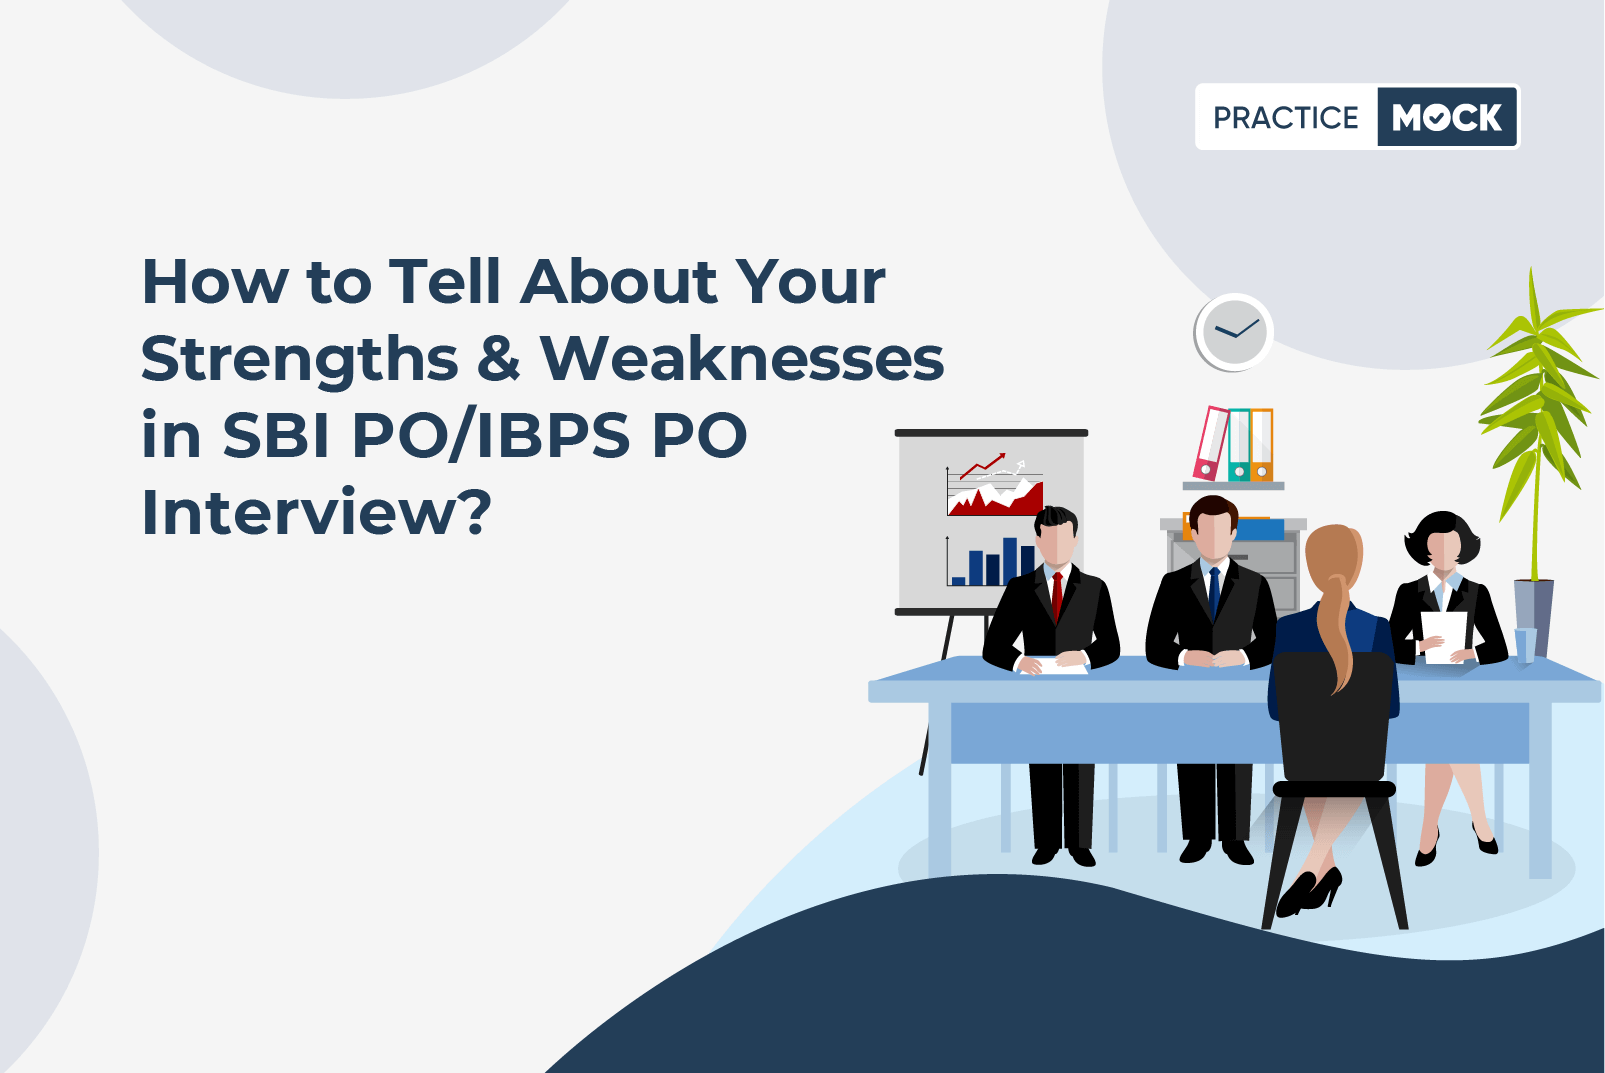 How to talk about your Strengths/Weaknesses in SBI PO/IBPS PO Interview?